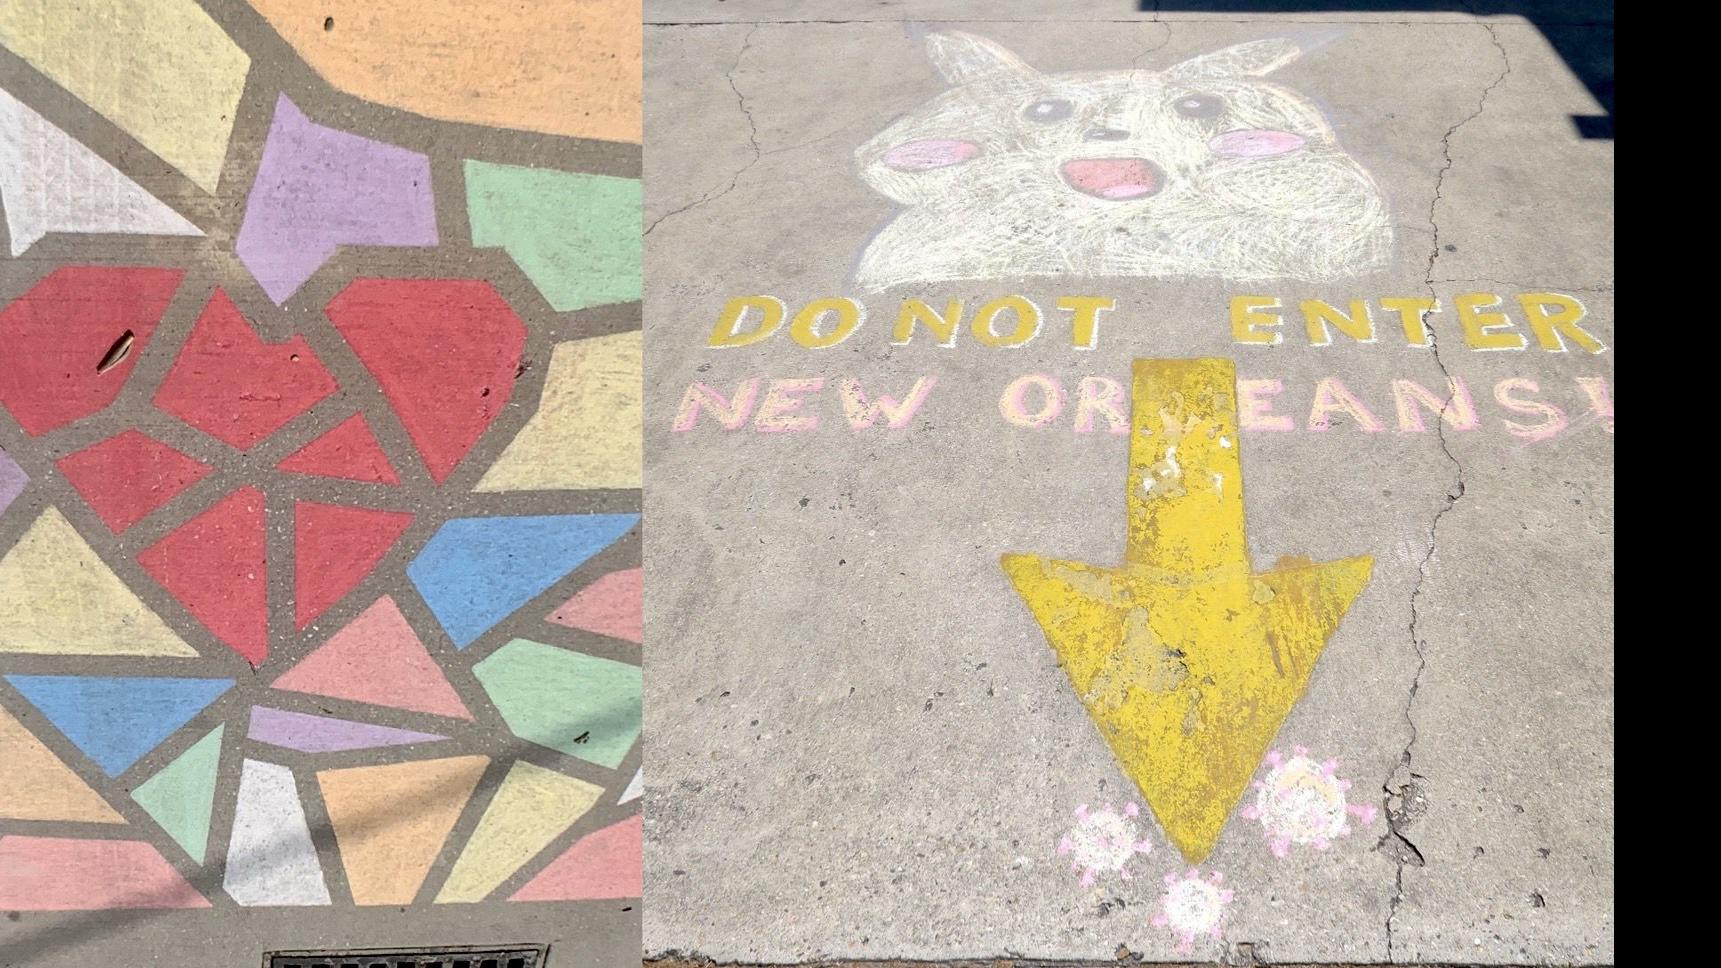 Chalk Drawings Capture The Coronavirus Mood For Cooped Up Kids And Social Commenters Coronavirus Nola Com